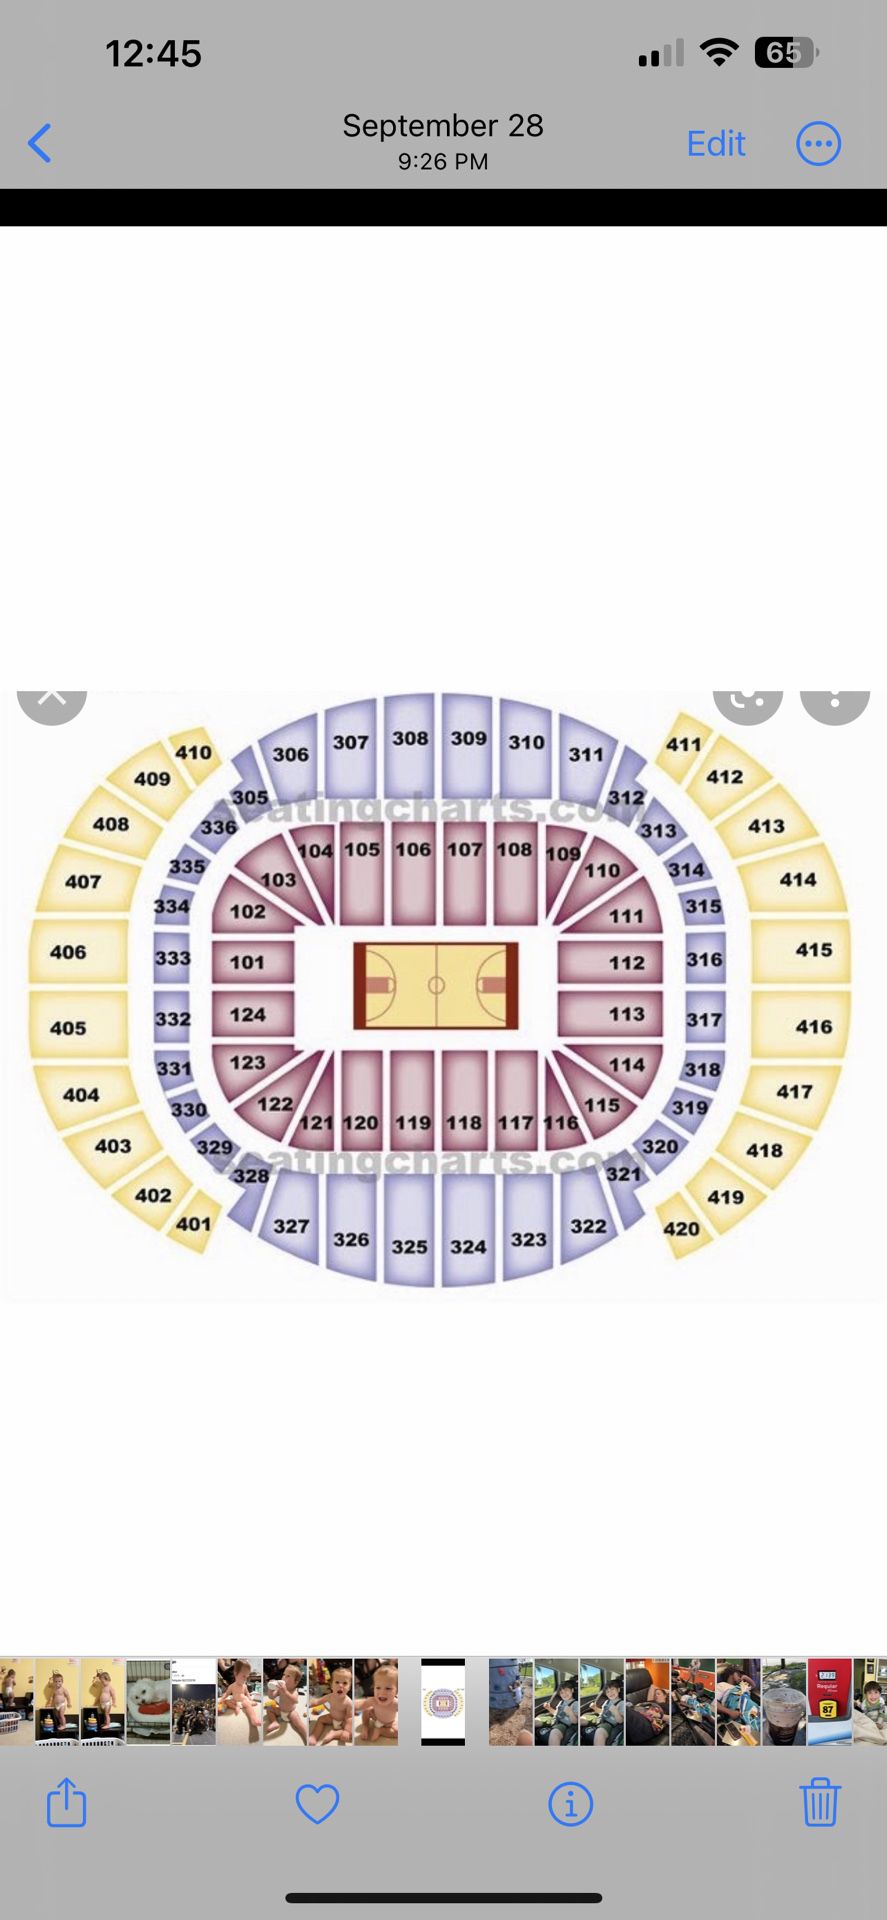 4 Los Angeles Clippers @ Miami Heat Lower Level Tickets 12/8